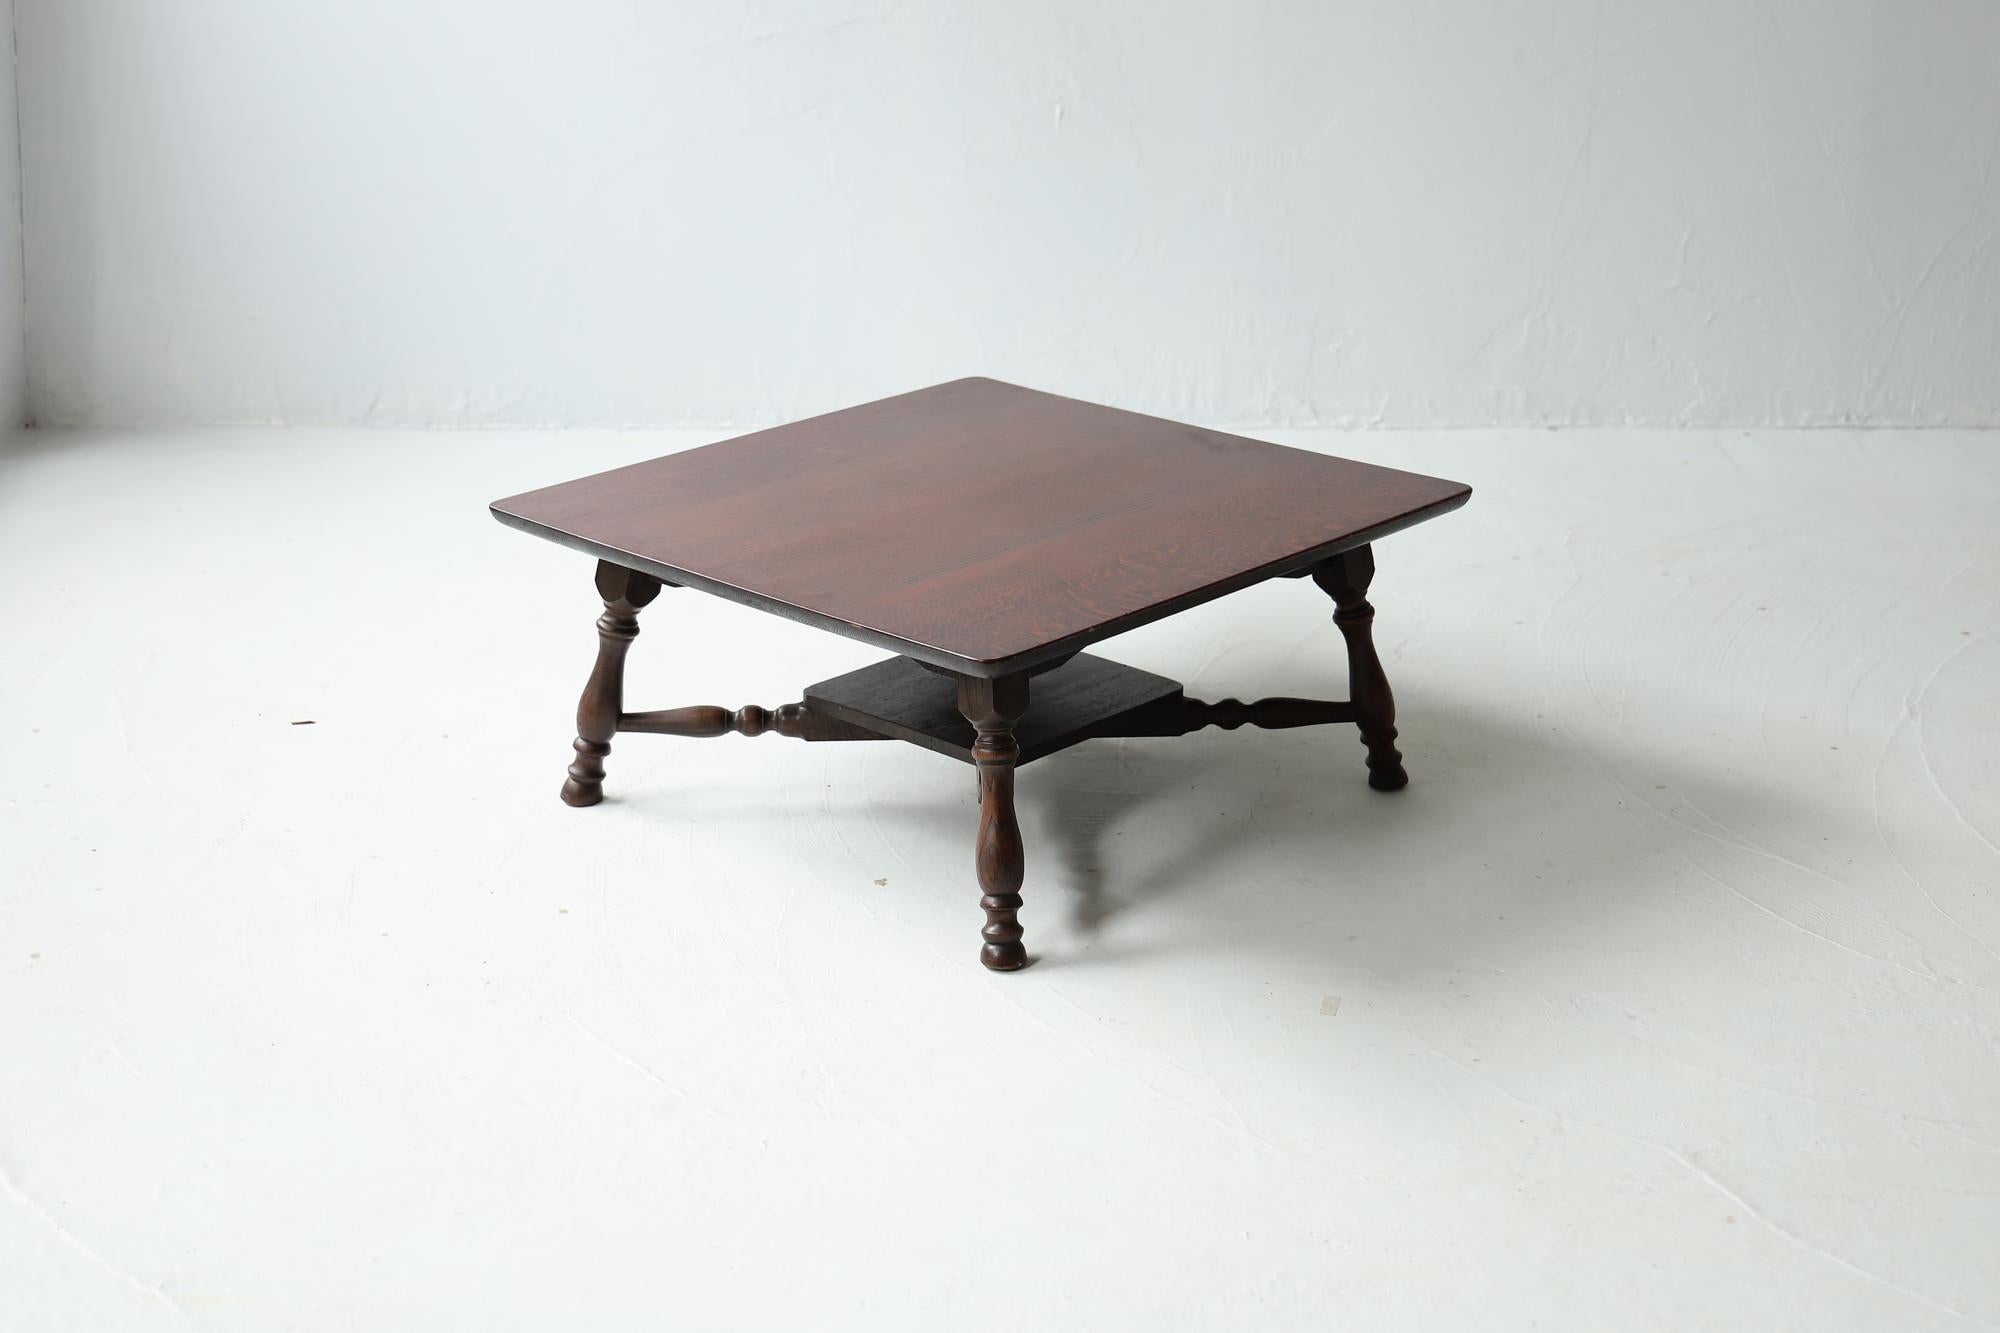 Japanese Antique Coffee Table, Wabi-Sabi, Early 20th Century For Sale 5